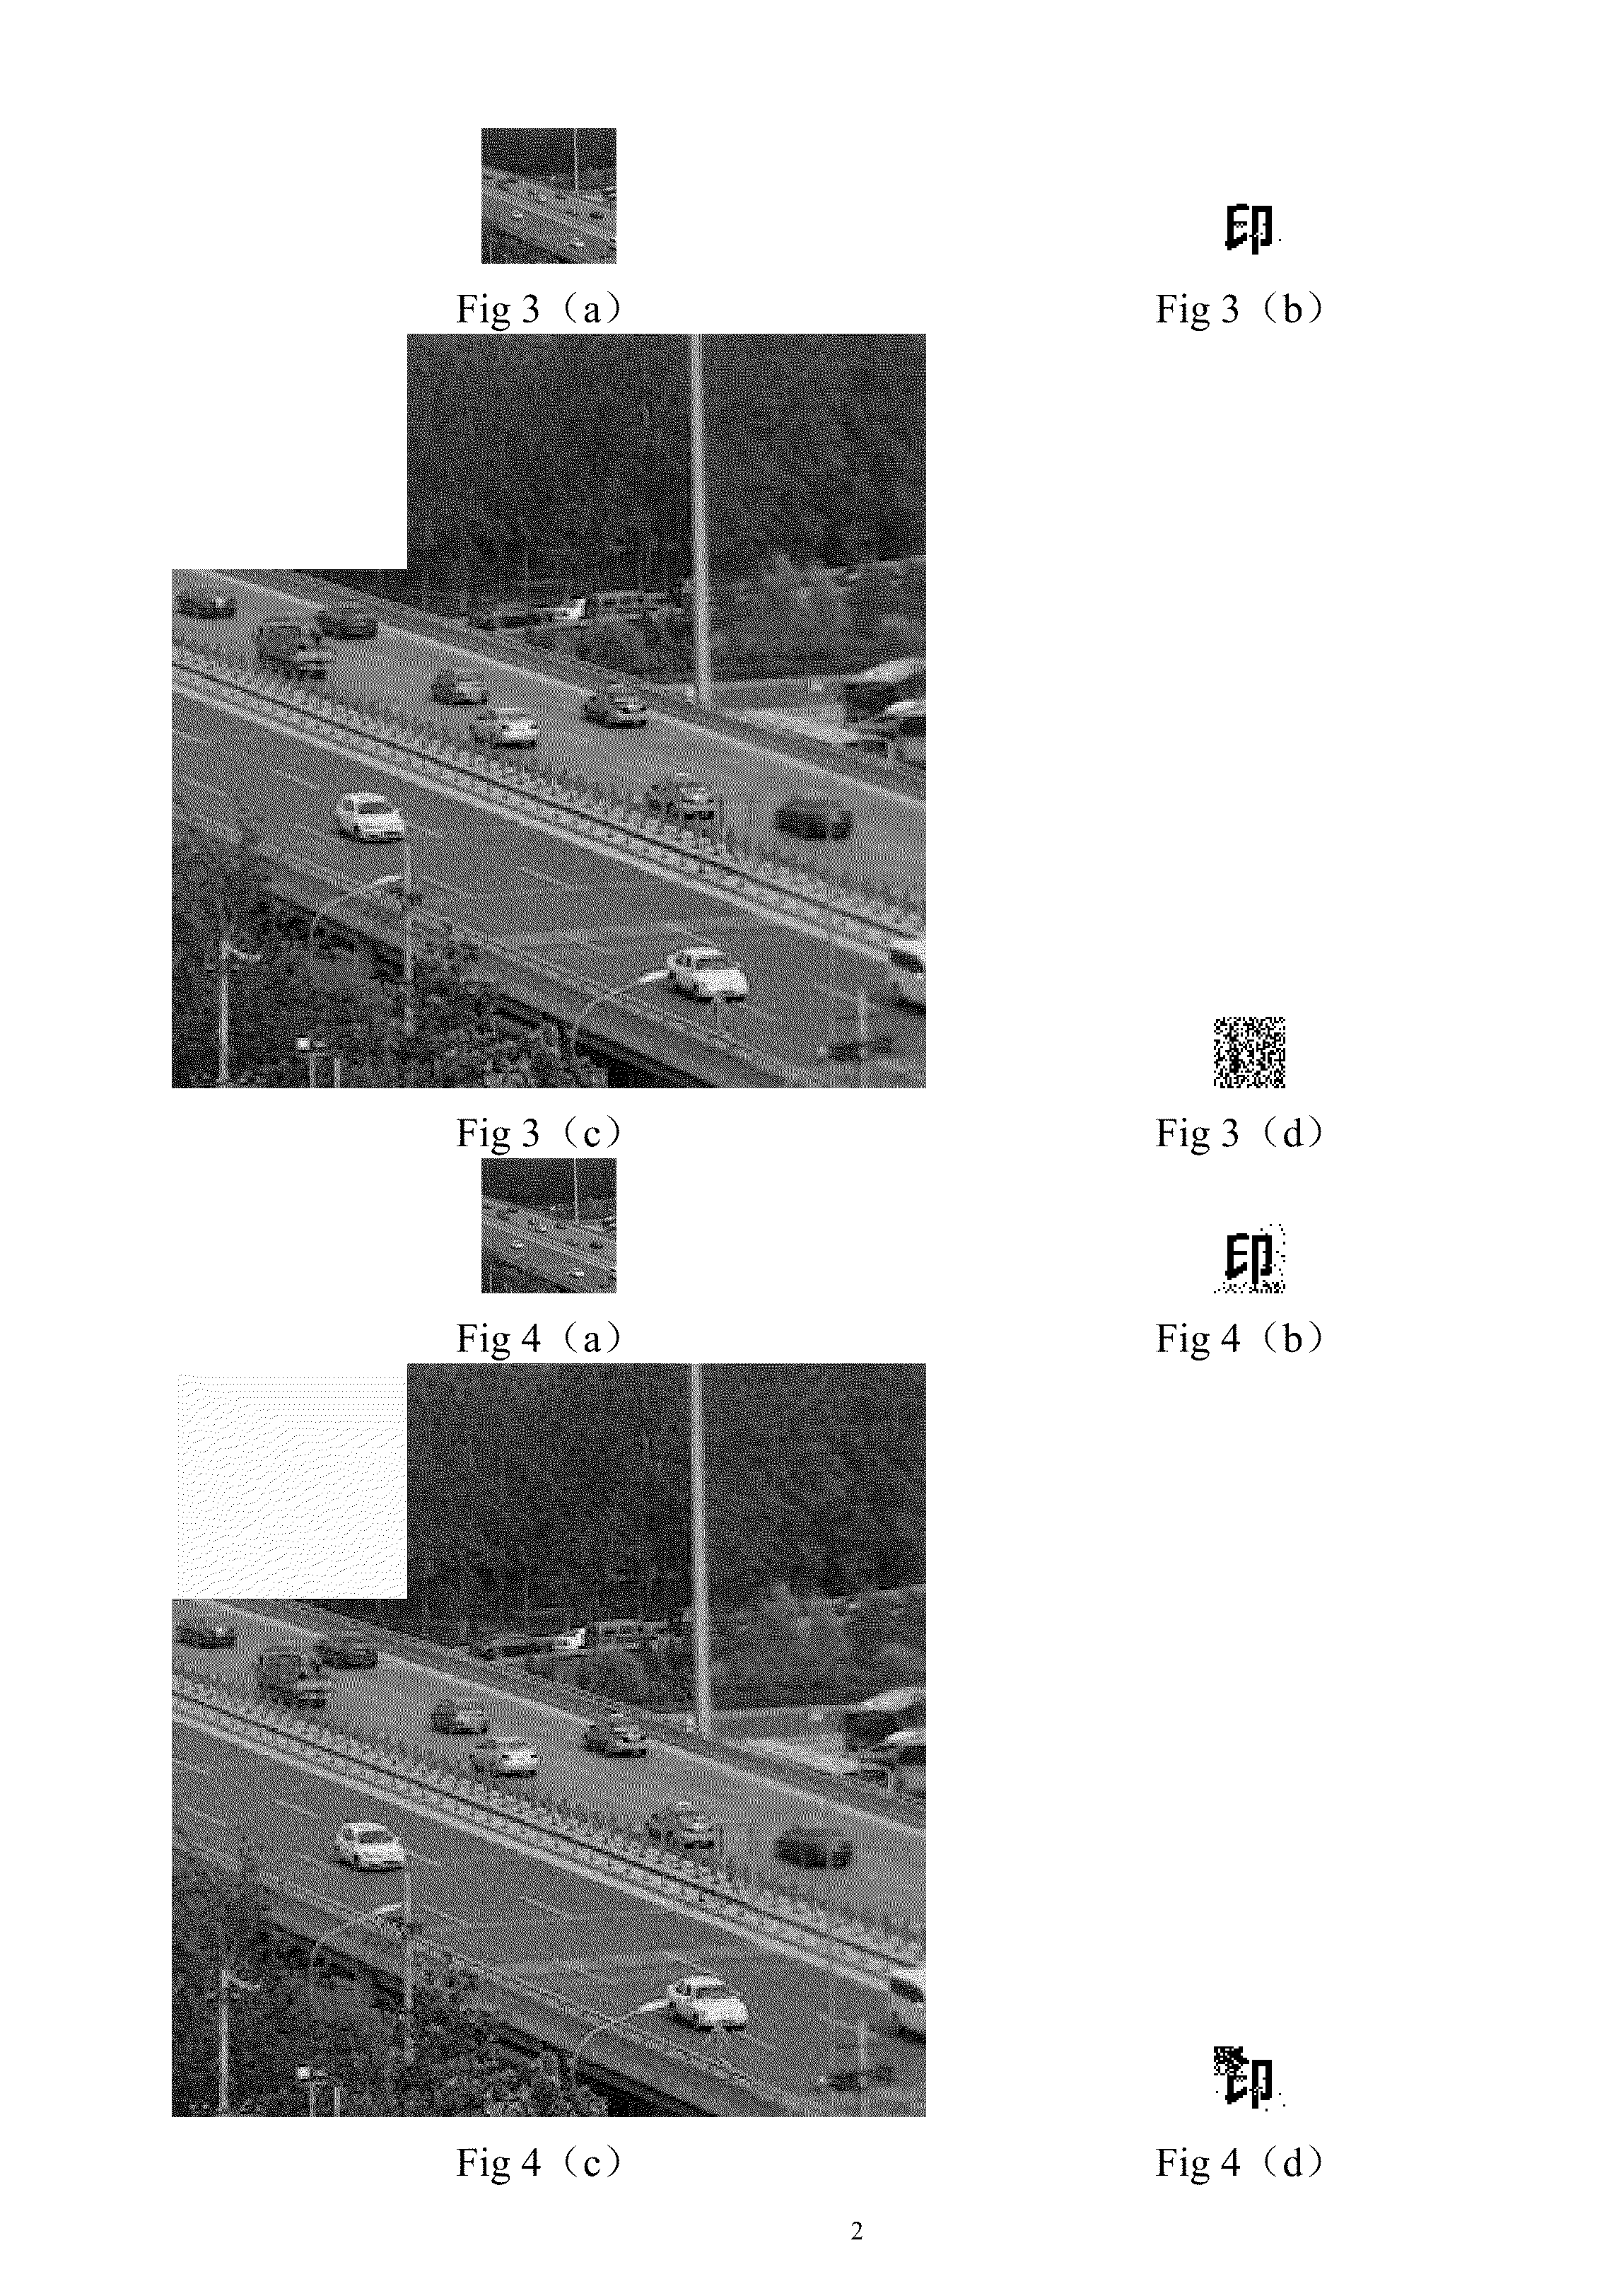 Method for embedding and extracting multi-scale space based watermark